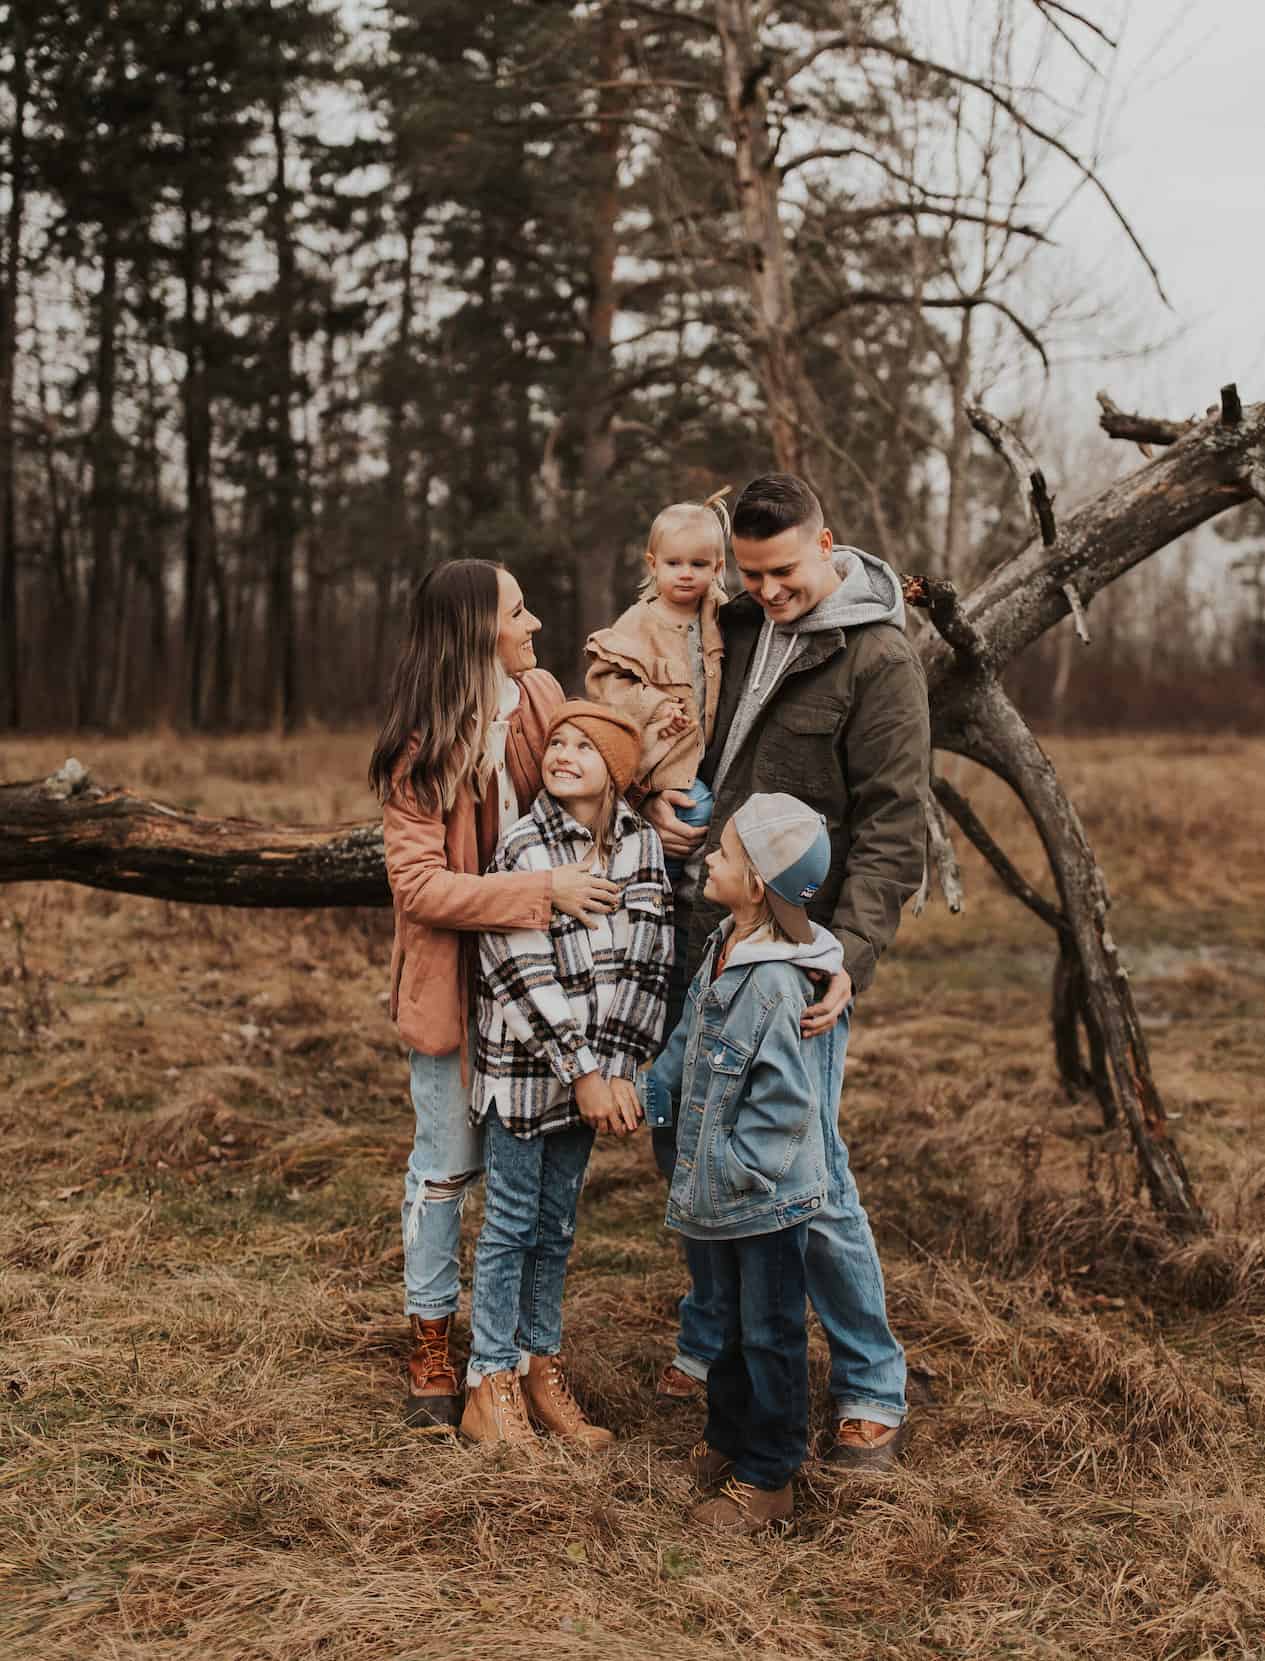 image of a family of five standing in a wooded area in the fall wearing casual jackets and jeans